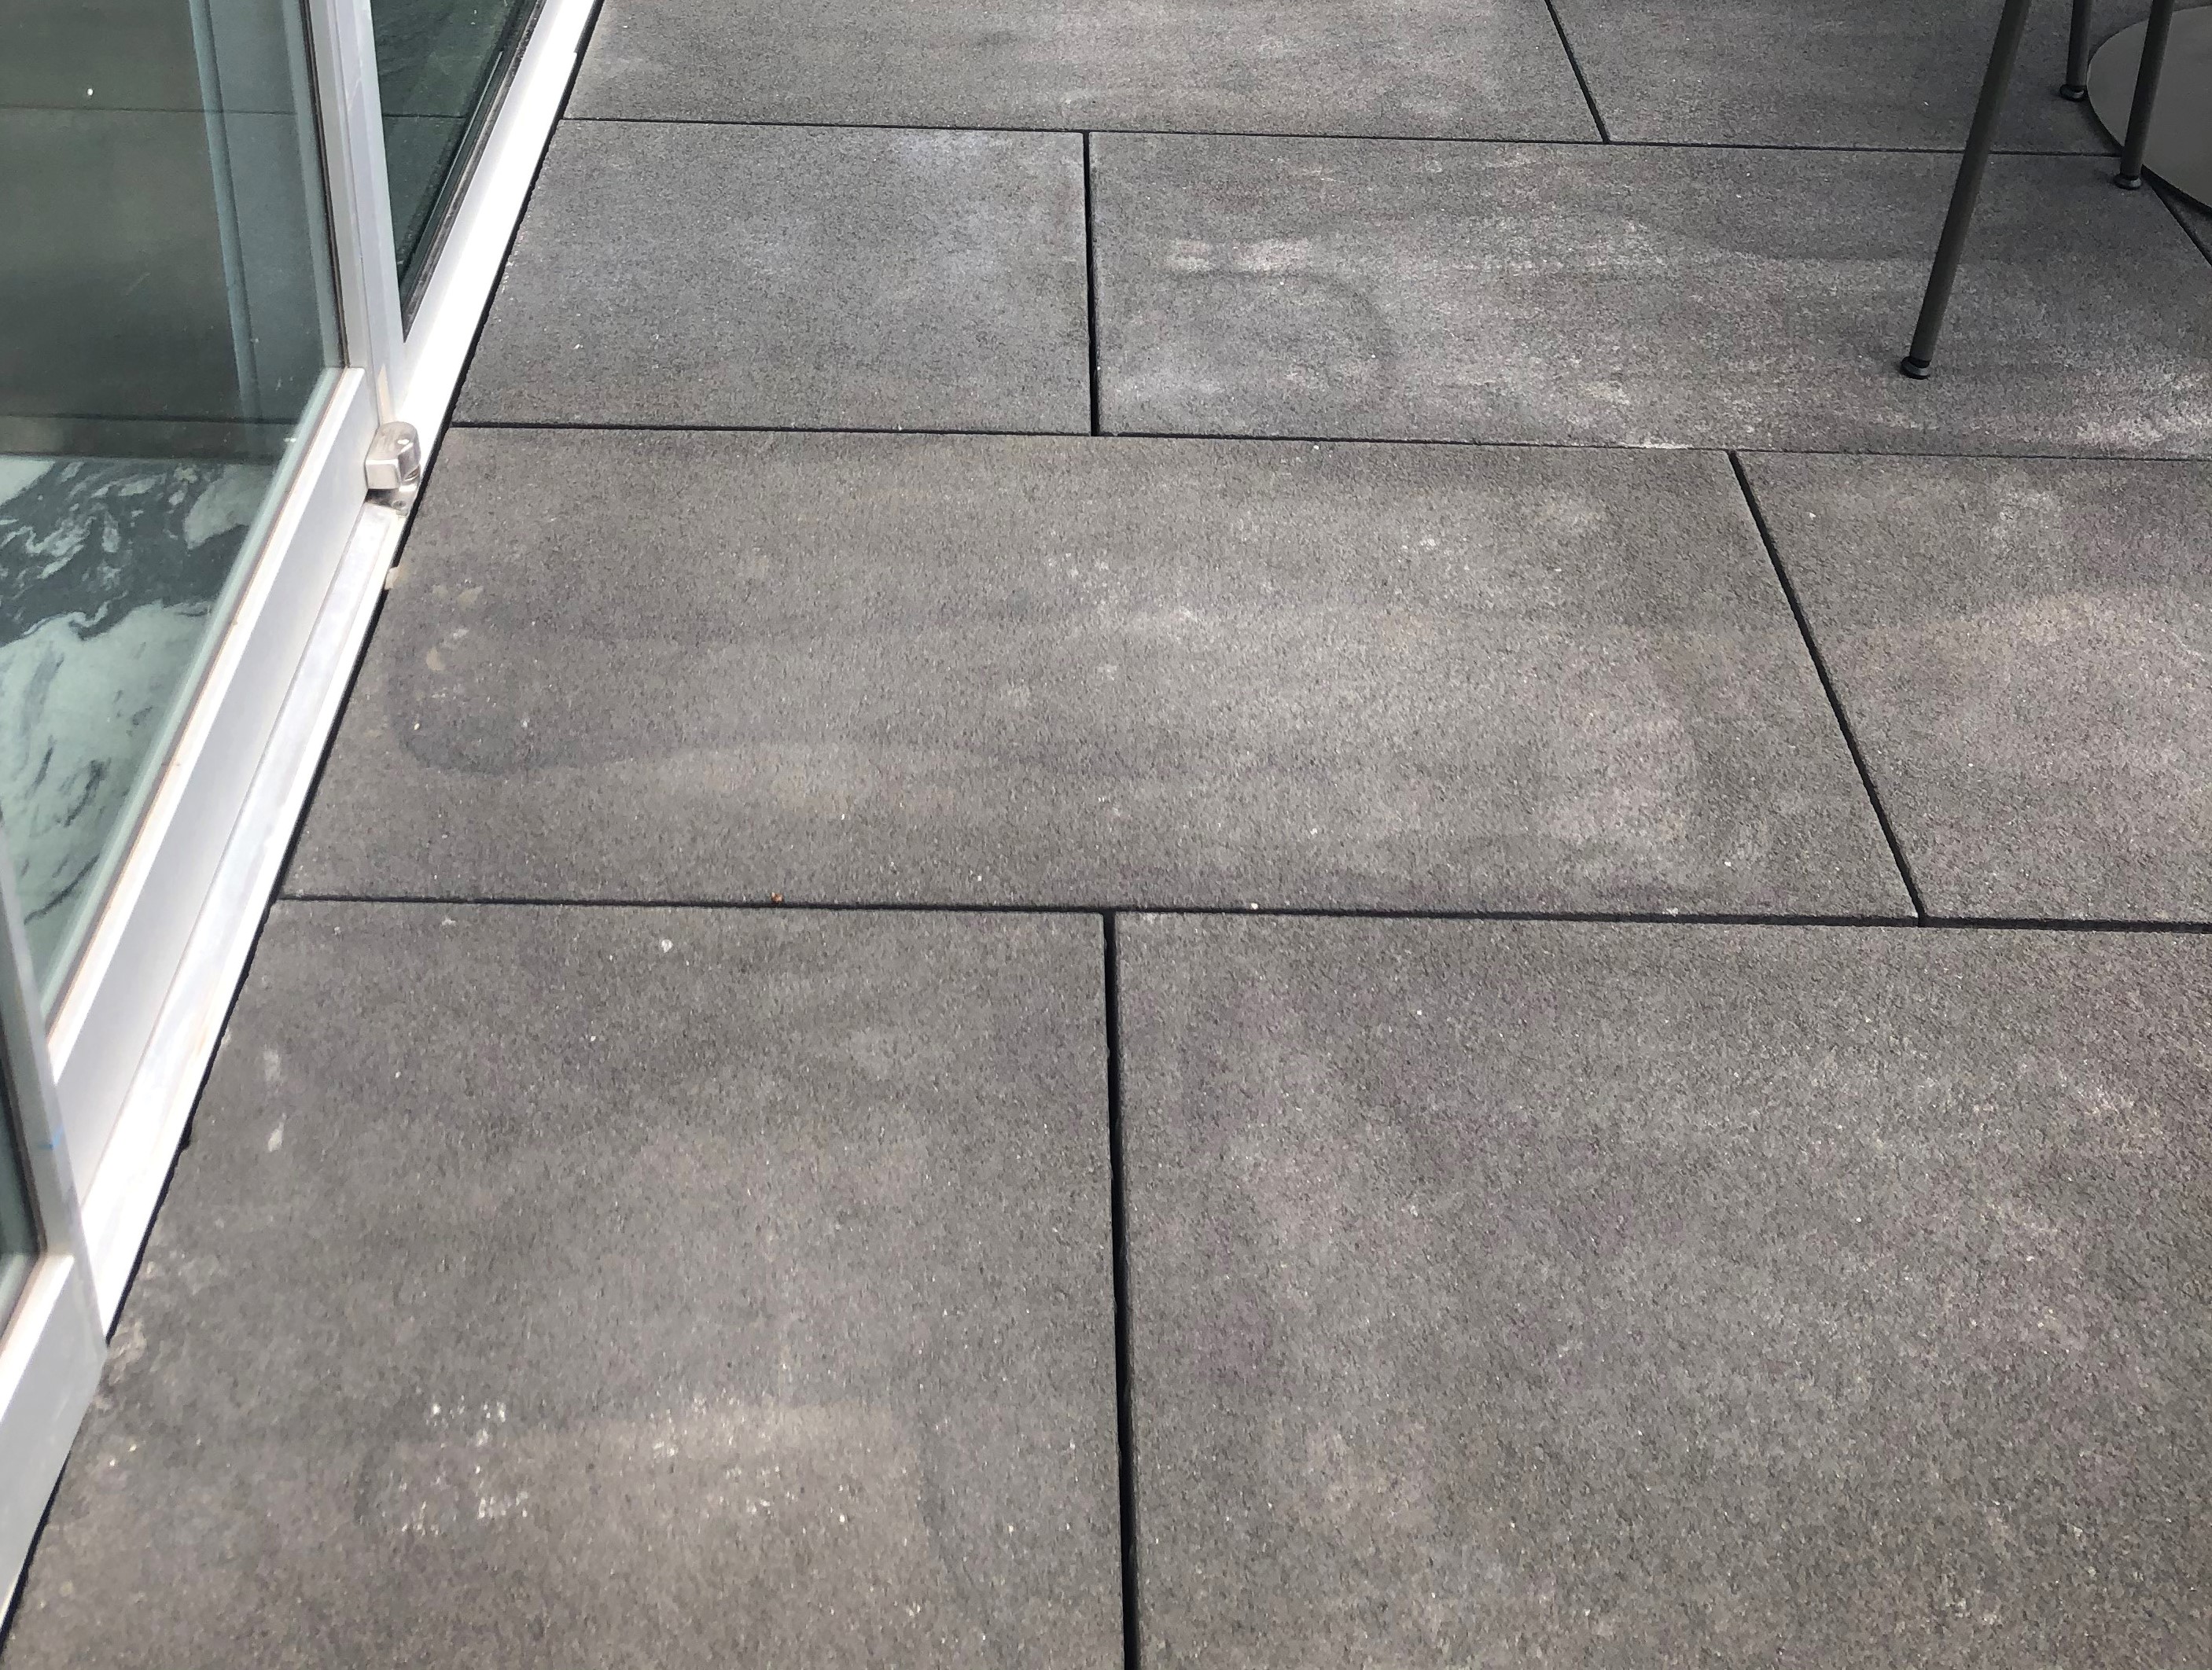 Dark gray, rectangular concrete pavers with lighter areas of efflorescence.